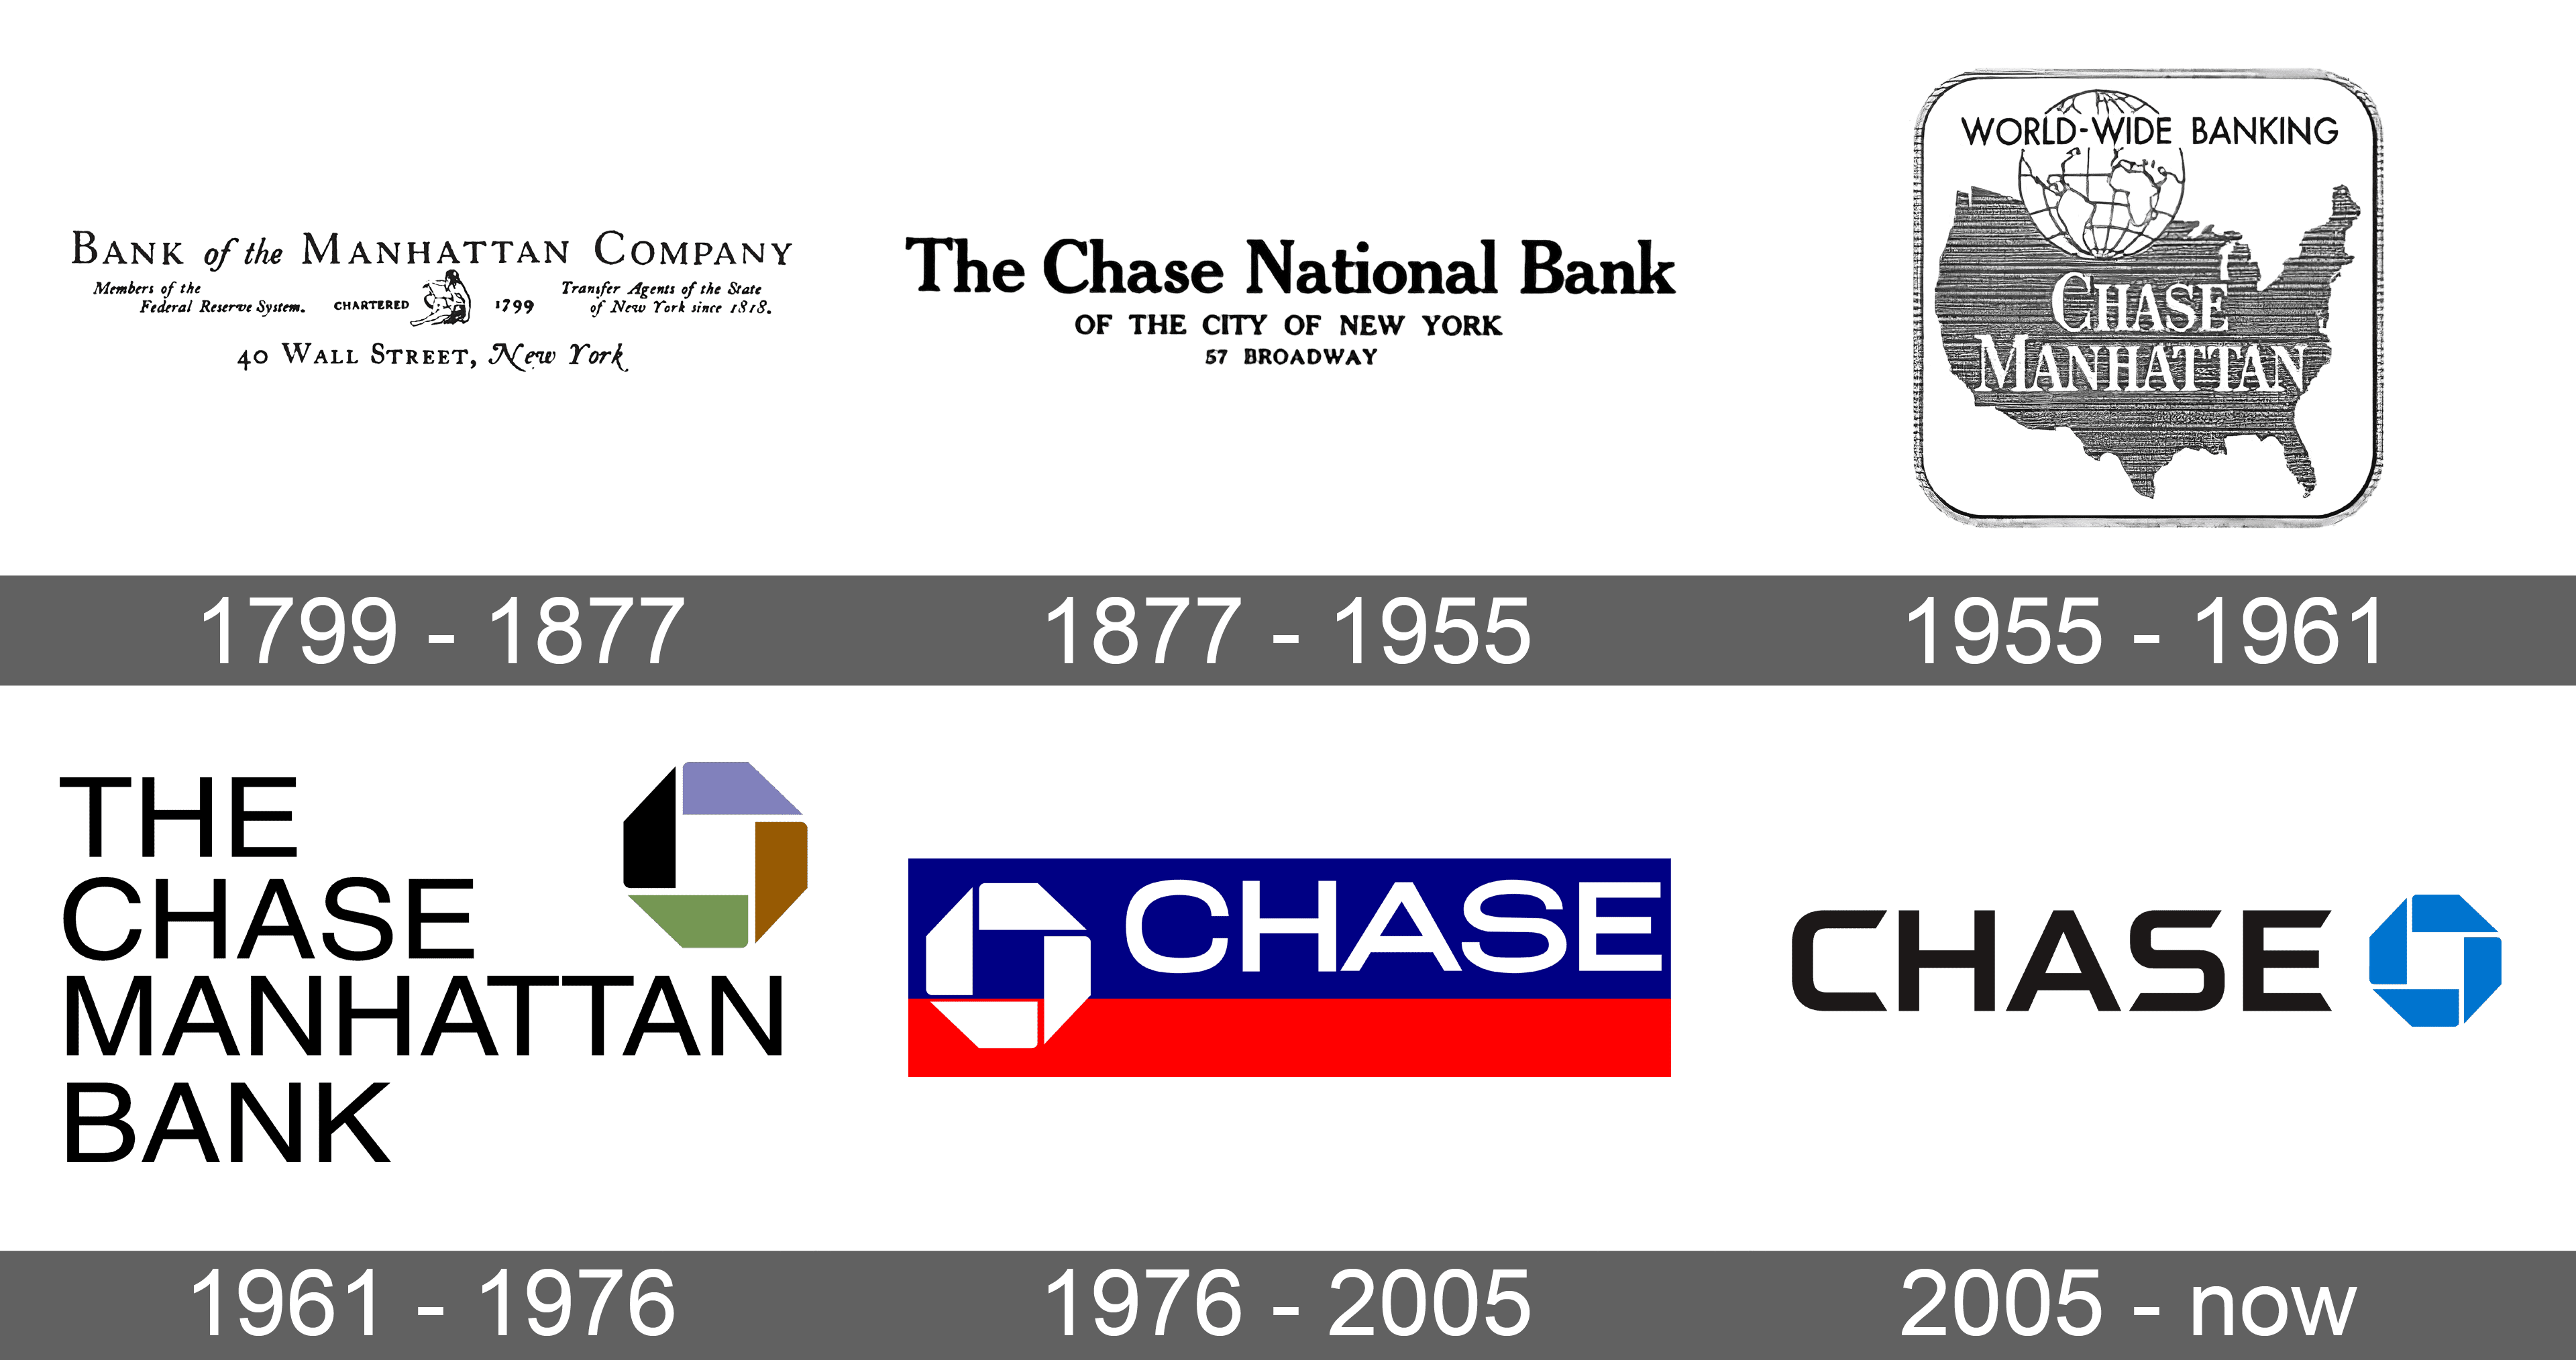 J.P. Morgan Chase Logo and symbol, meaning, history, PNG, brand